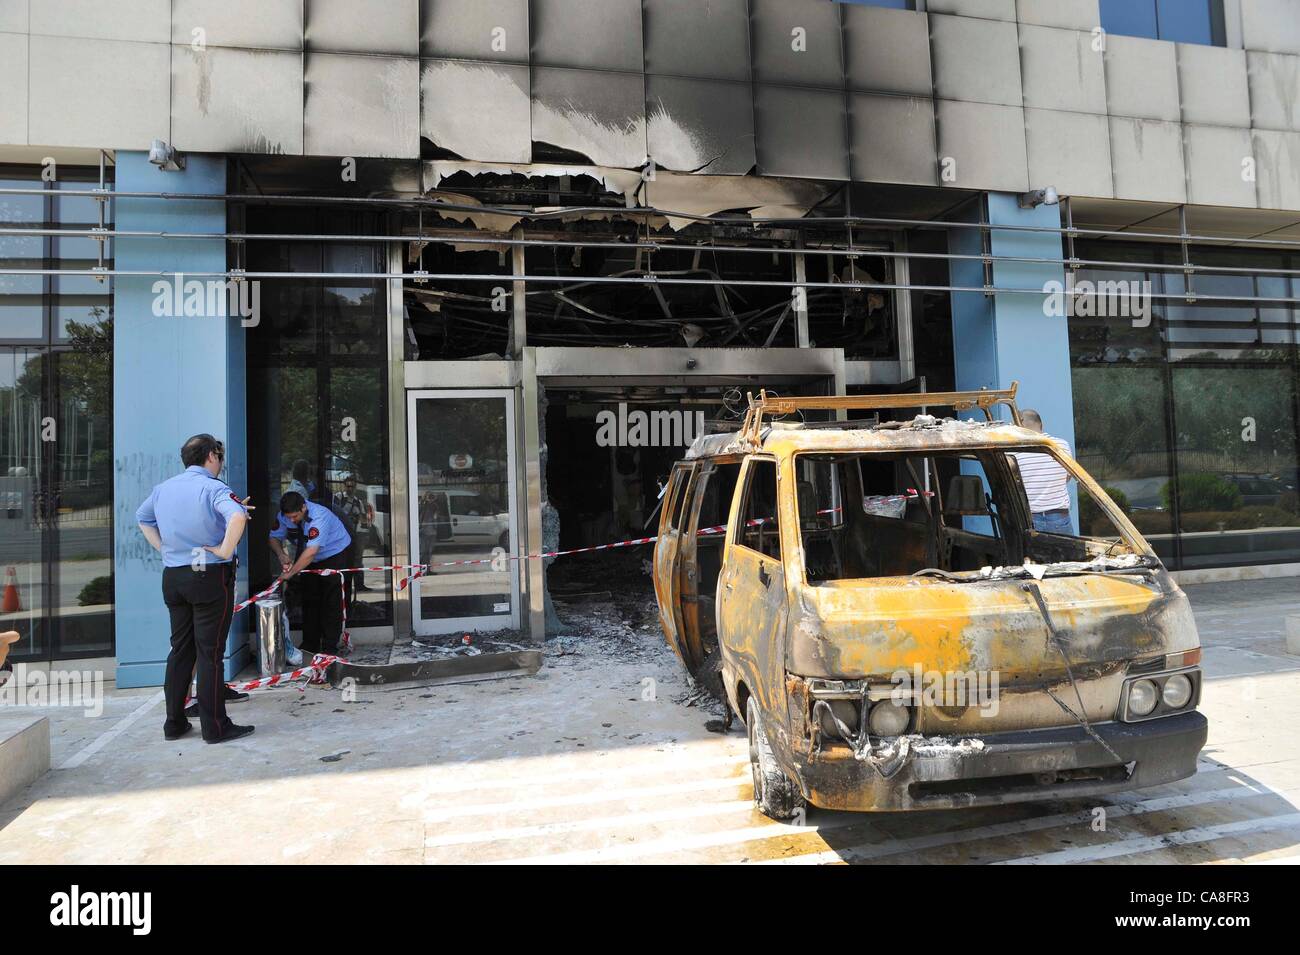 June 27 2012. Athens, Greece. 03:45 am, the Microsoft headquarters in the  Marousi district of Athens was damaged by an incendiary device carried in a  van. The attackers rammed the building's front